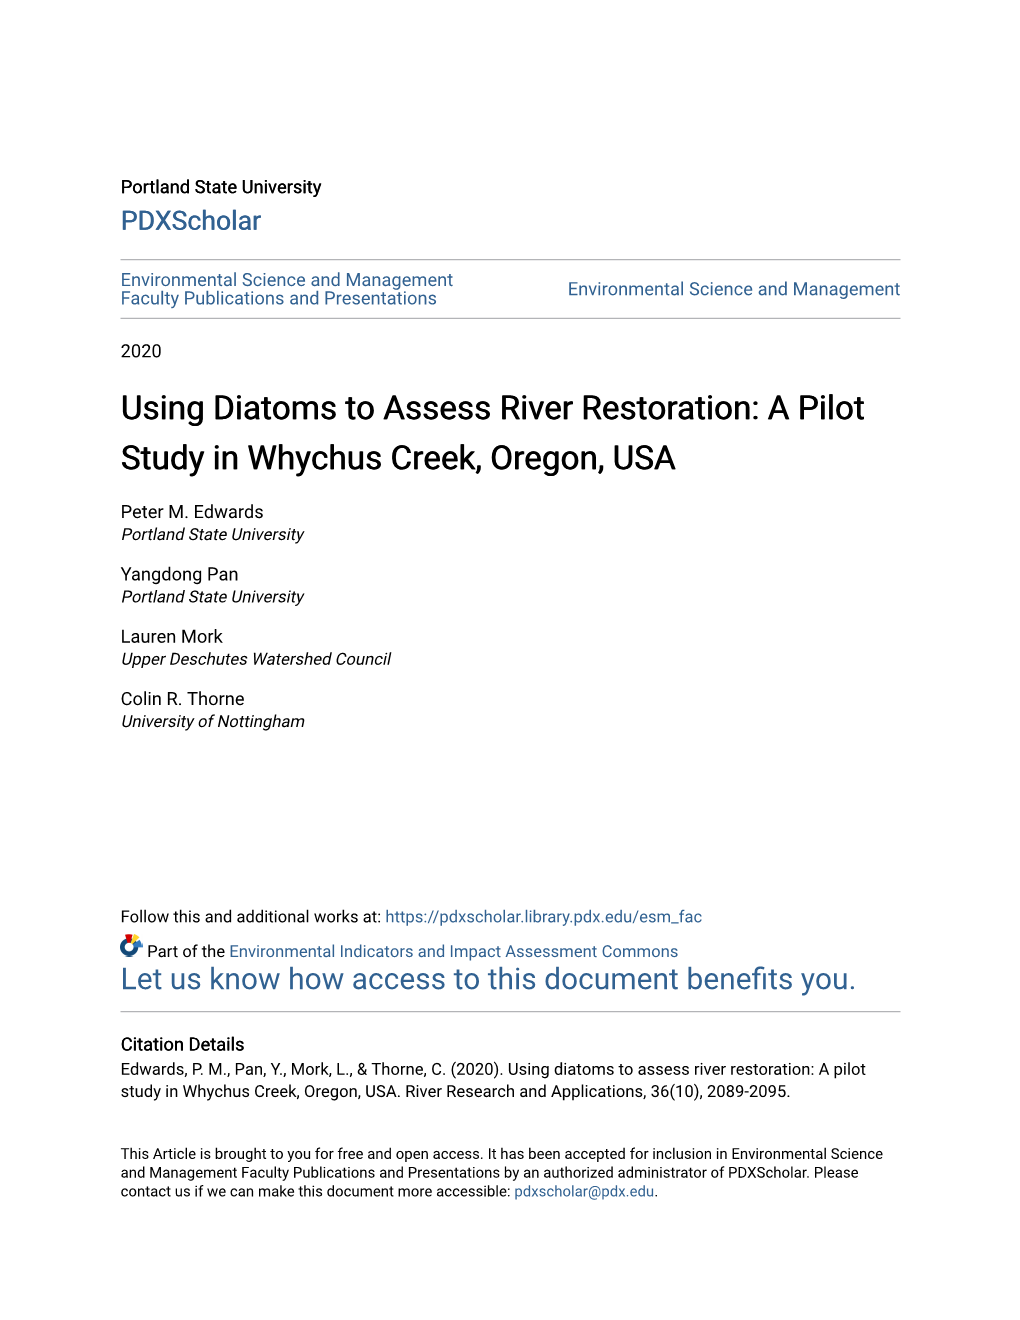 Using Diatoms to Assess River Restoration: a Pilot Study in Whychus Creek, Oregon, USA